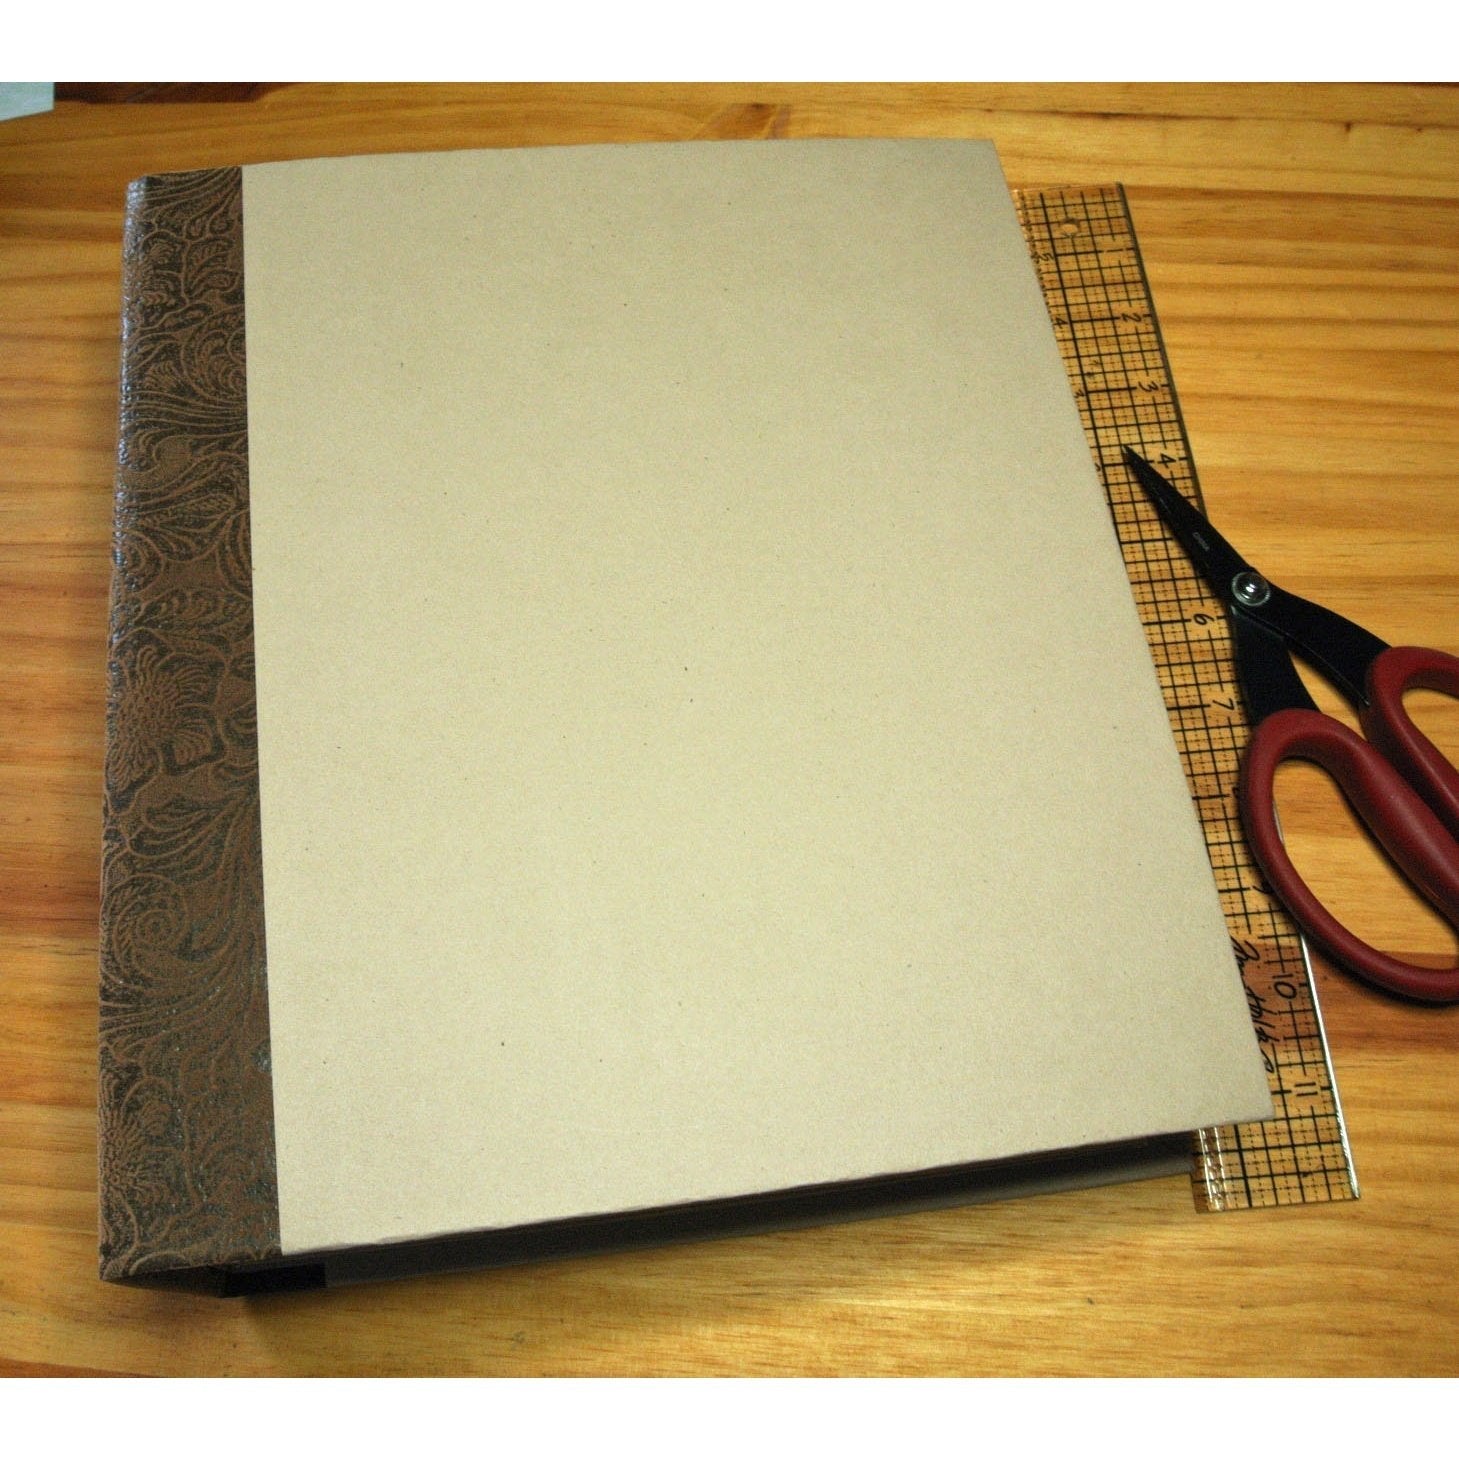 Blank Scrapbook Album, Handmade - Large Album with Storage Case to document a year of your life, for Photos and Memorabilia, You Decorate it